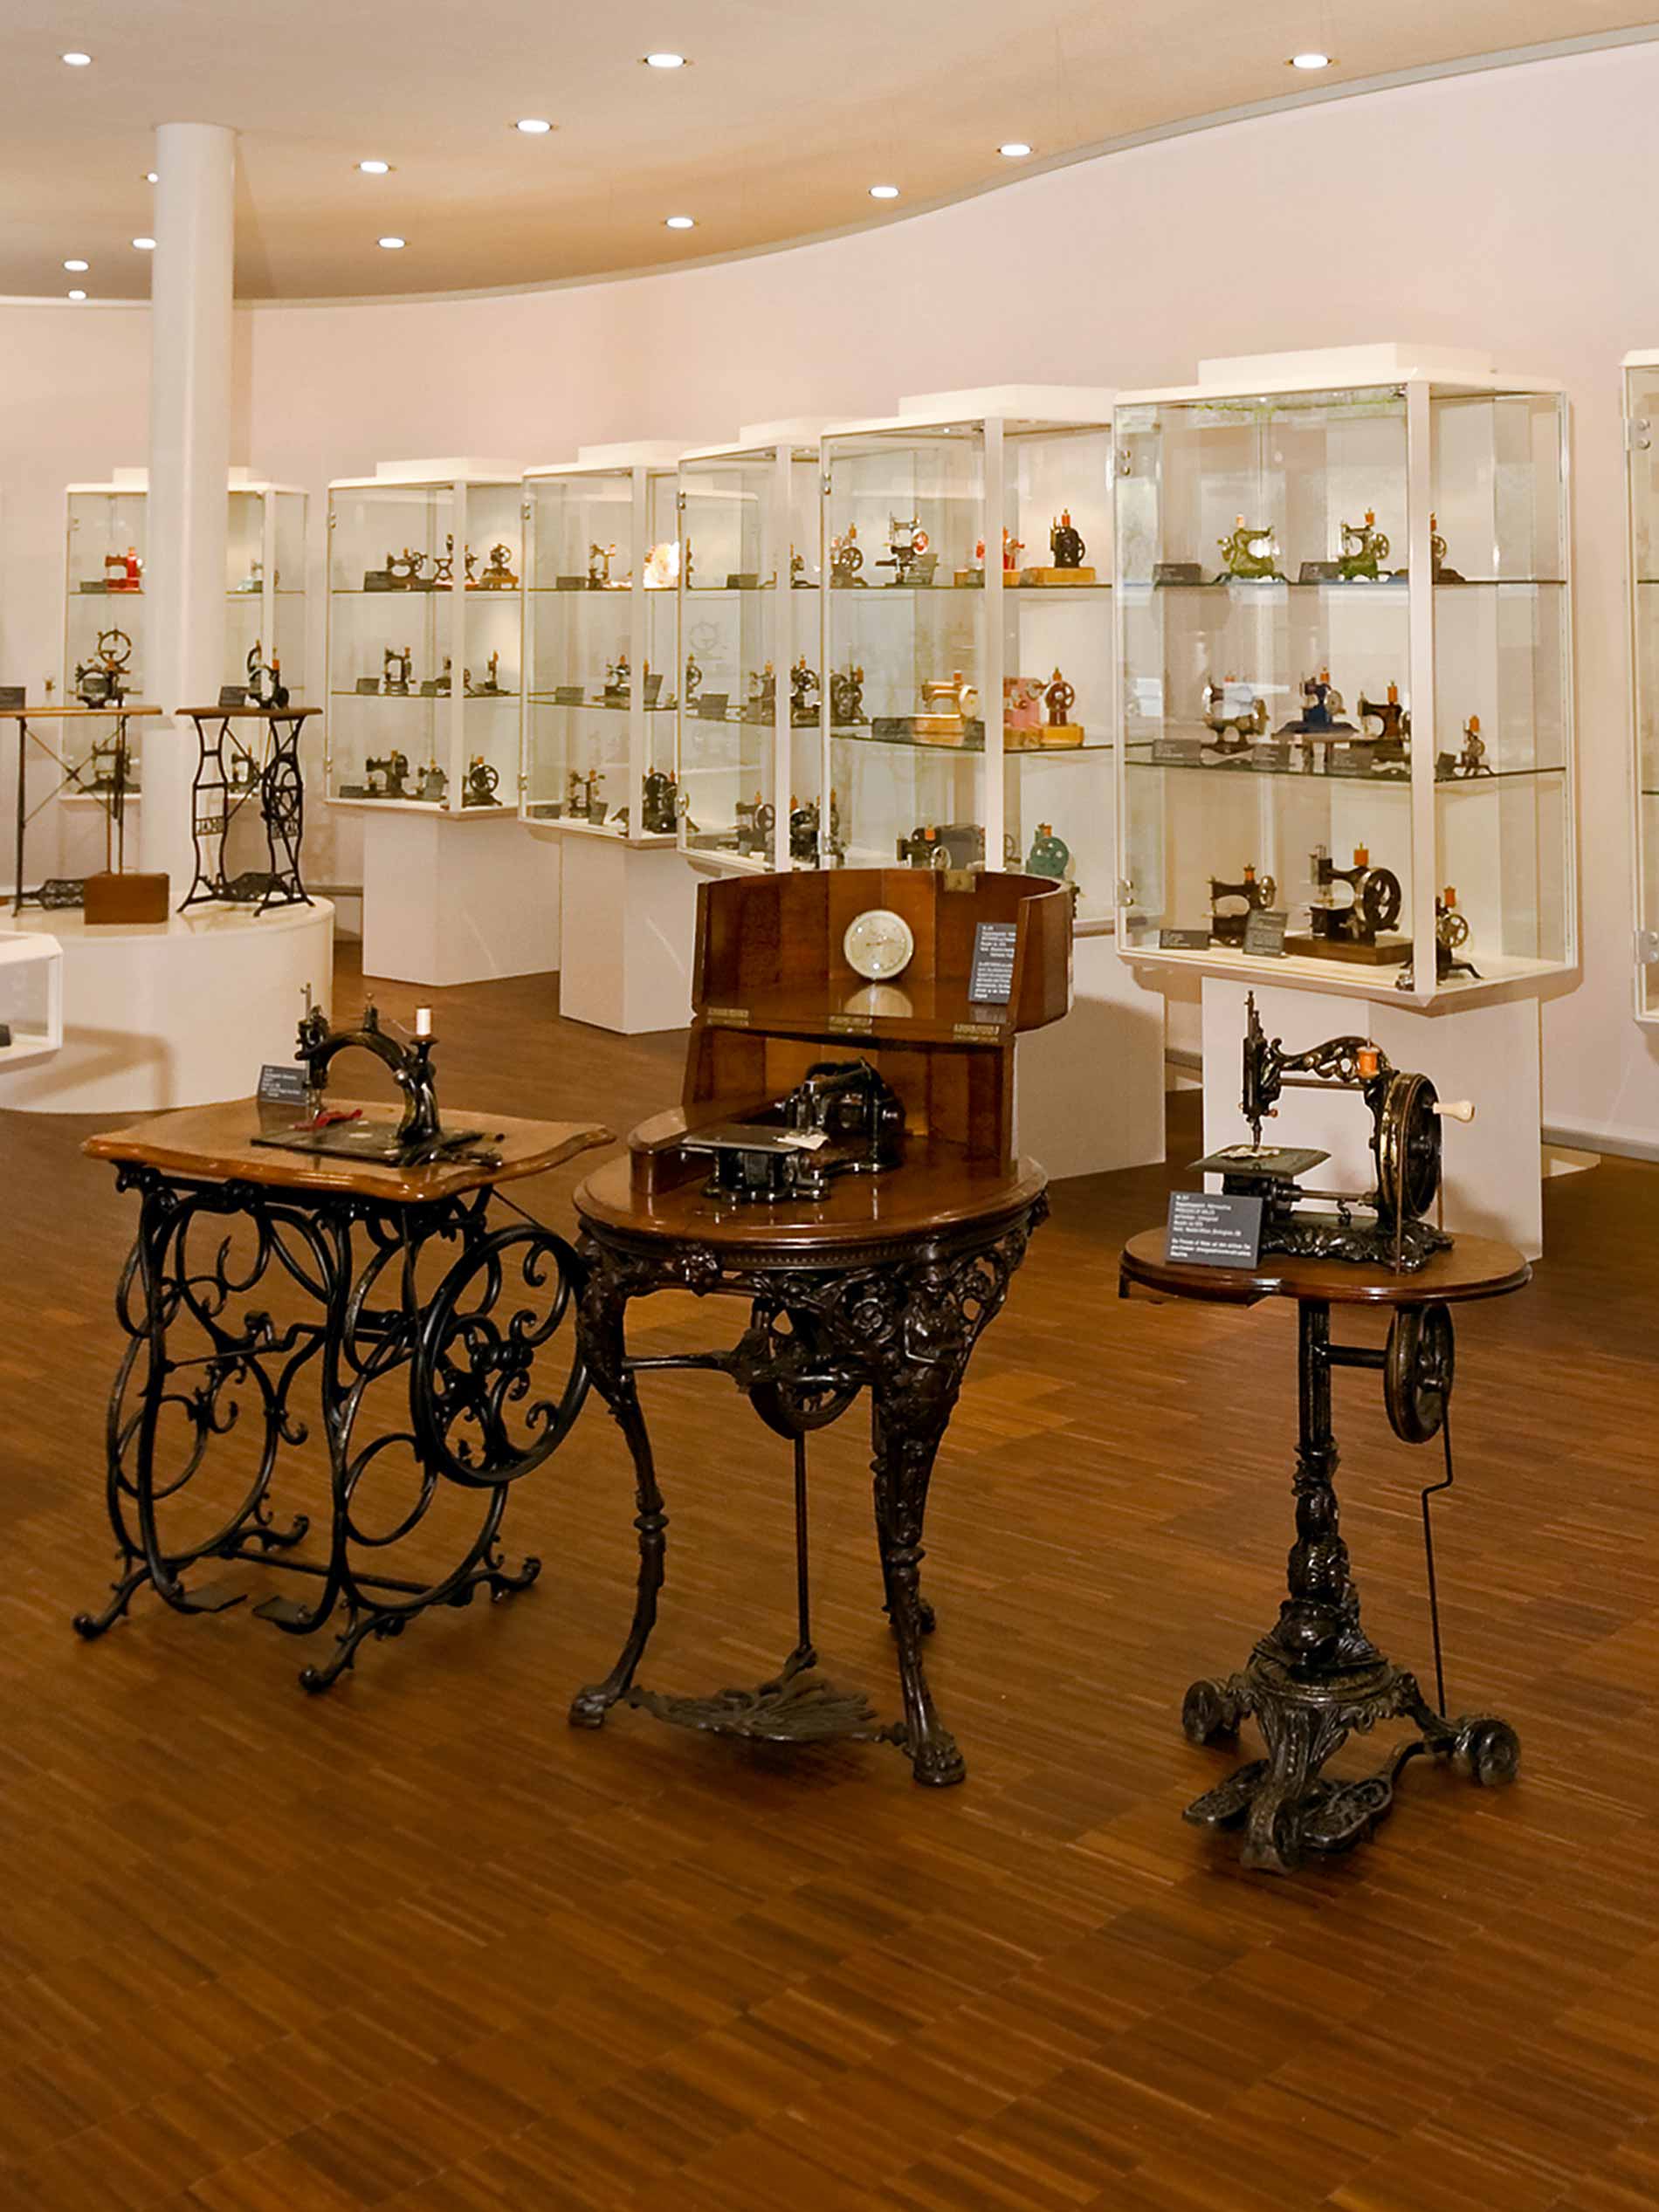 Interior view of the sewing machine museum with three sewing machines and display cases in the background | mey®